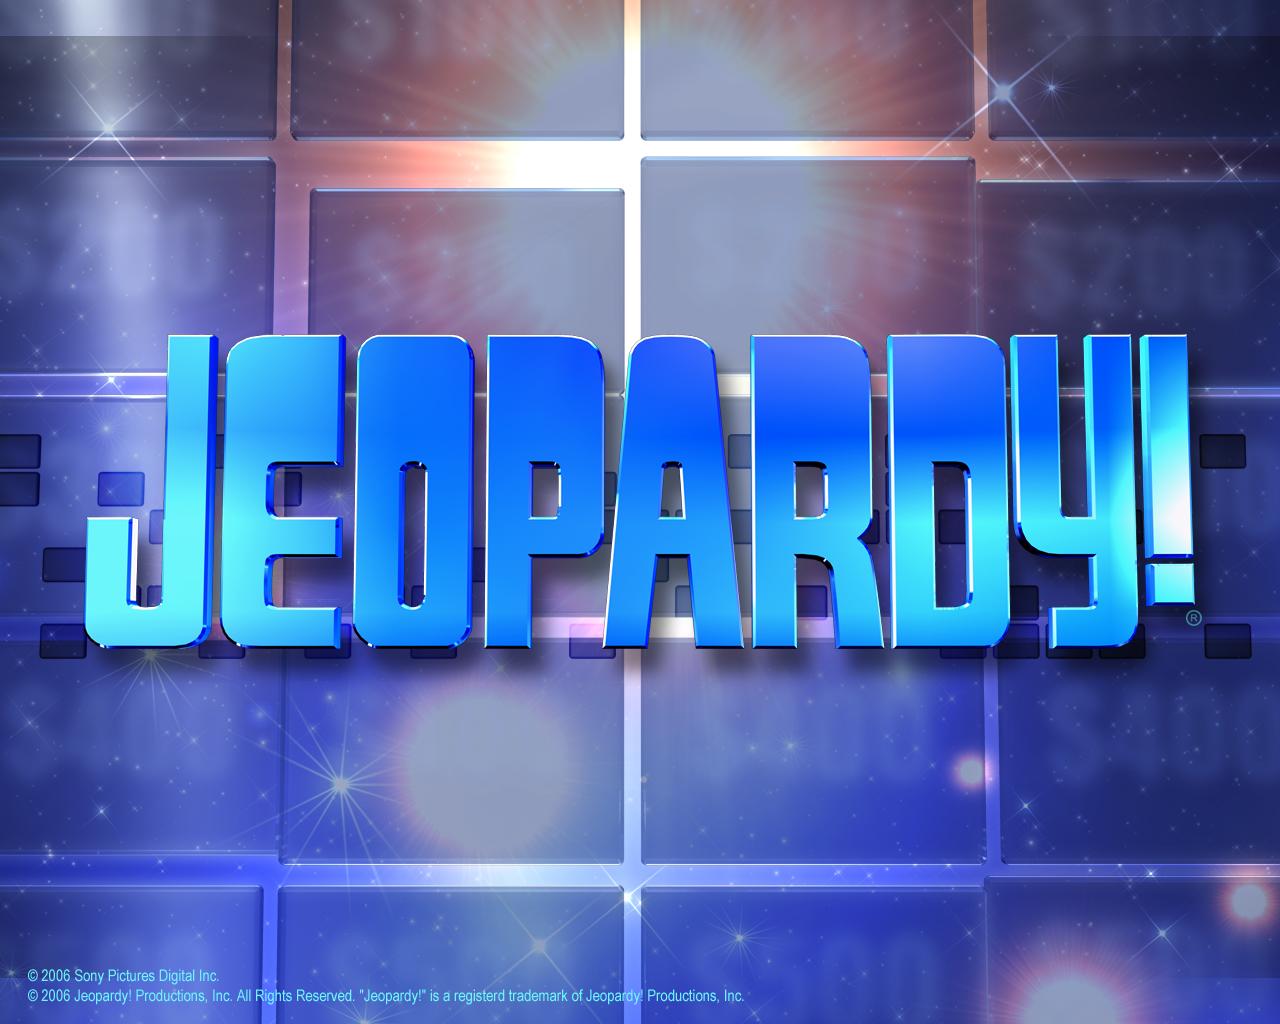 Writing Equations Jeopardy Game download free software